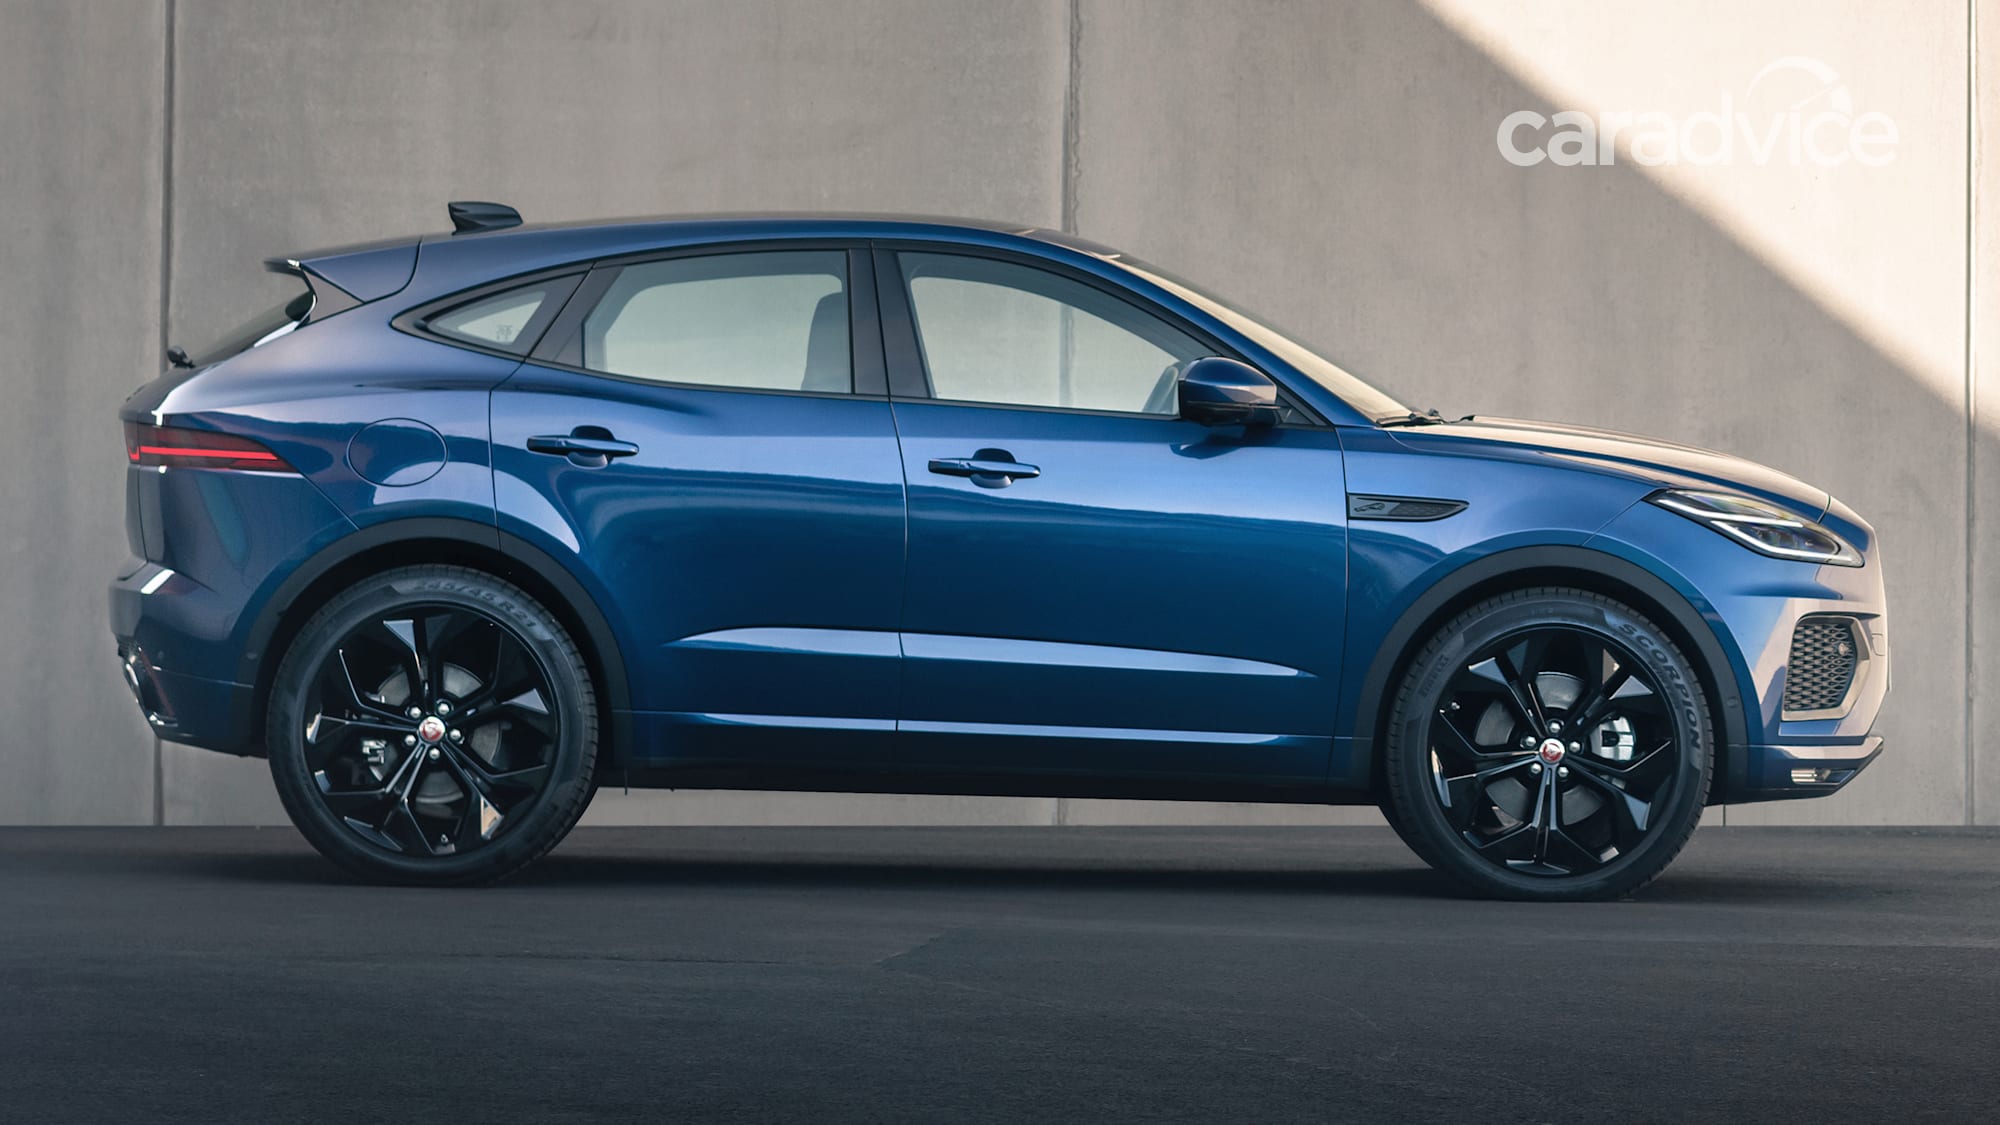 2021 Jaguar E-Pace price and specs: Diesel dropped as range slimmed | CarAdvice